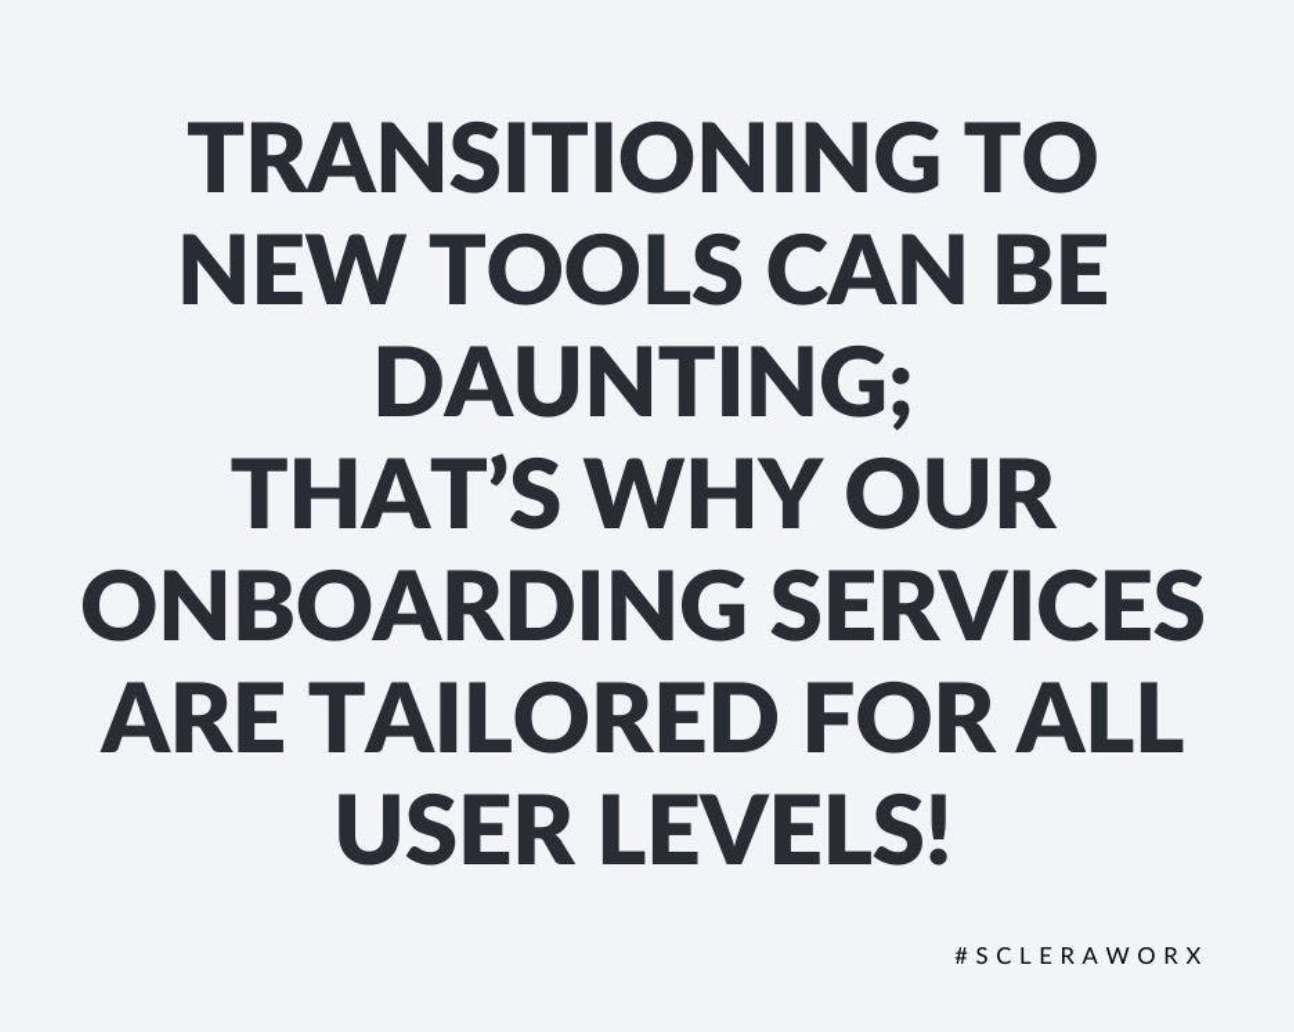 Infographic about Scleraworx’s onboarding services